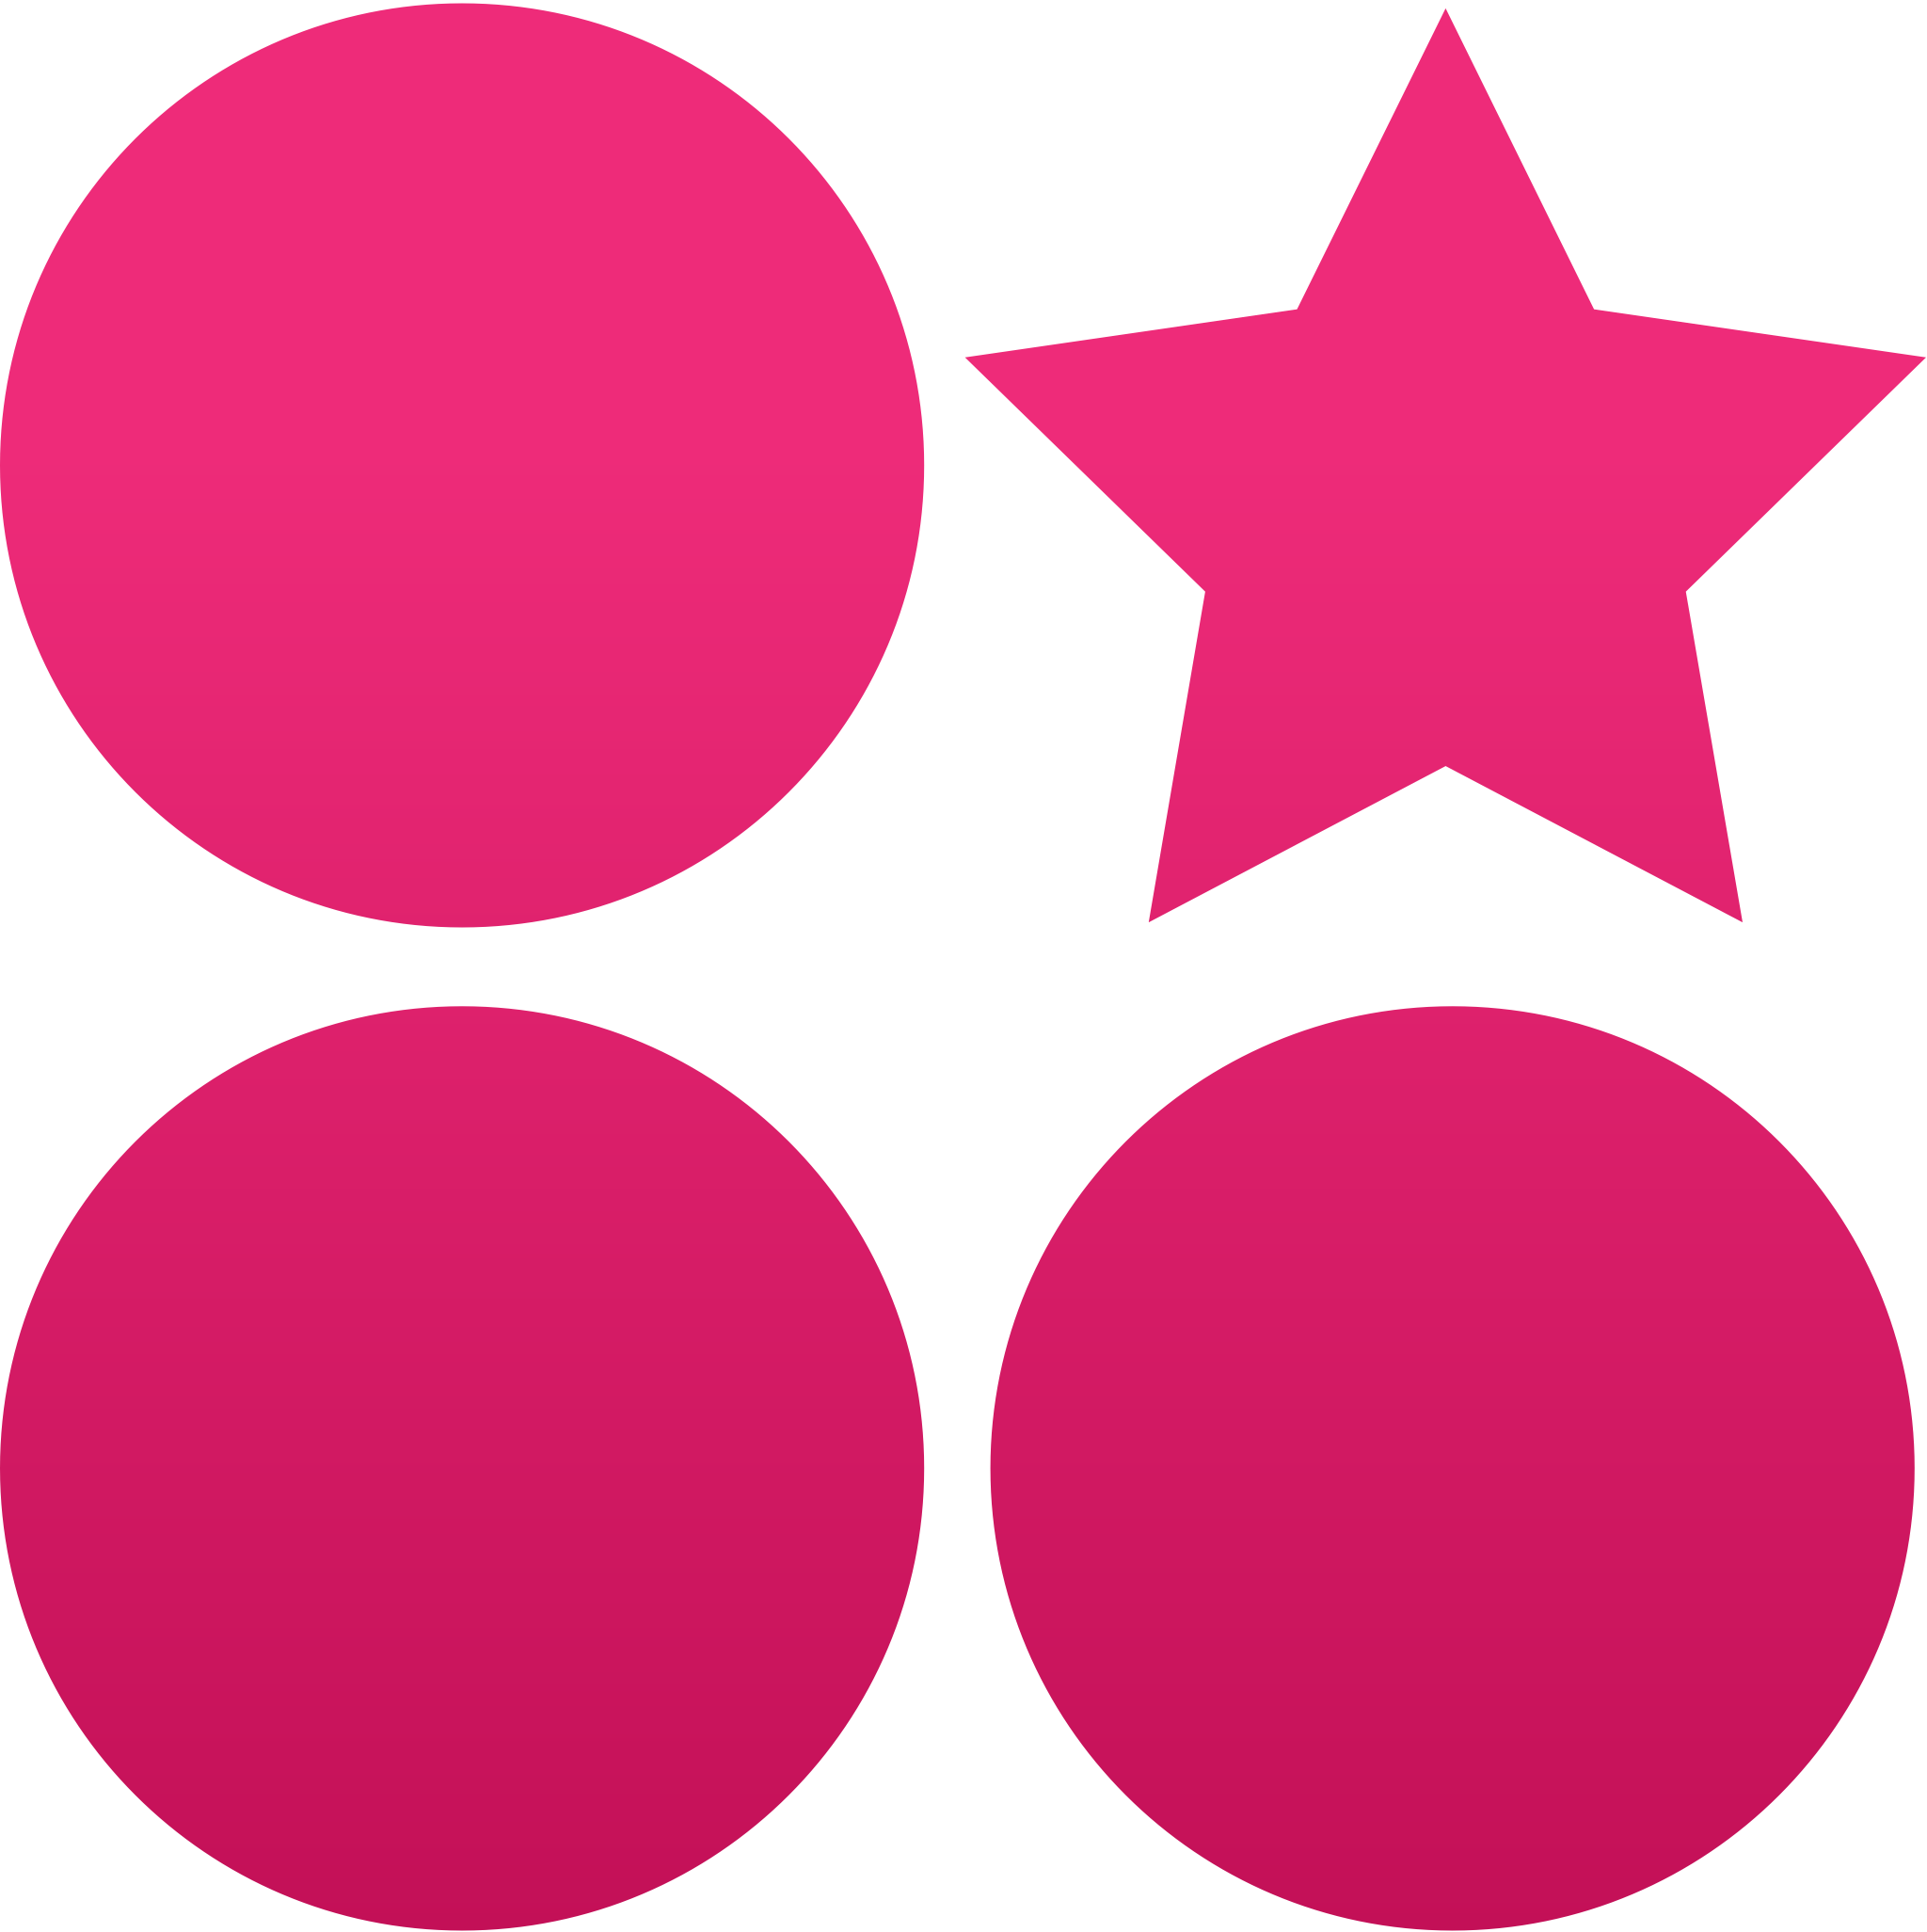 An image of three circles and one star next to them conveying the importance of Differentiation in Business Strategy